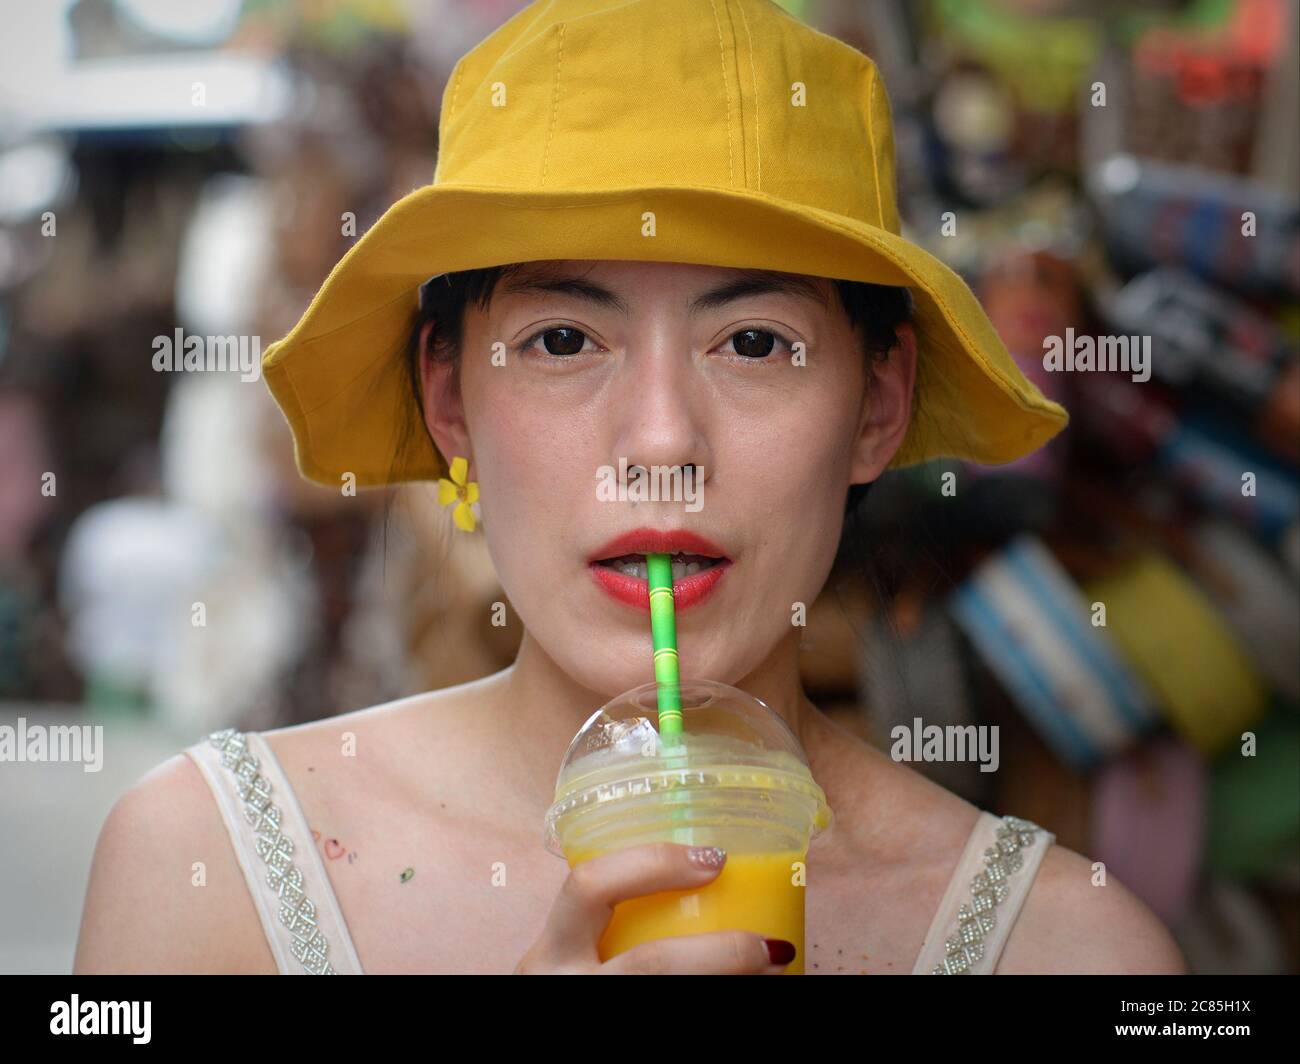 Young Asian woman with yellow floppy hat wears dark contact lenses and drinks yellow fruit juice with a straw from a plastic cup. Stock Photo